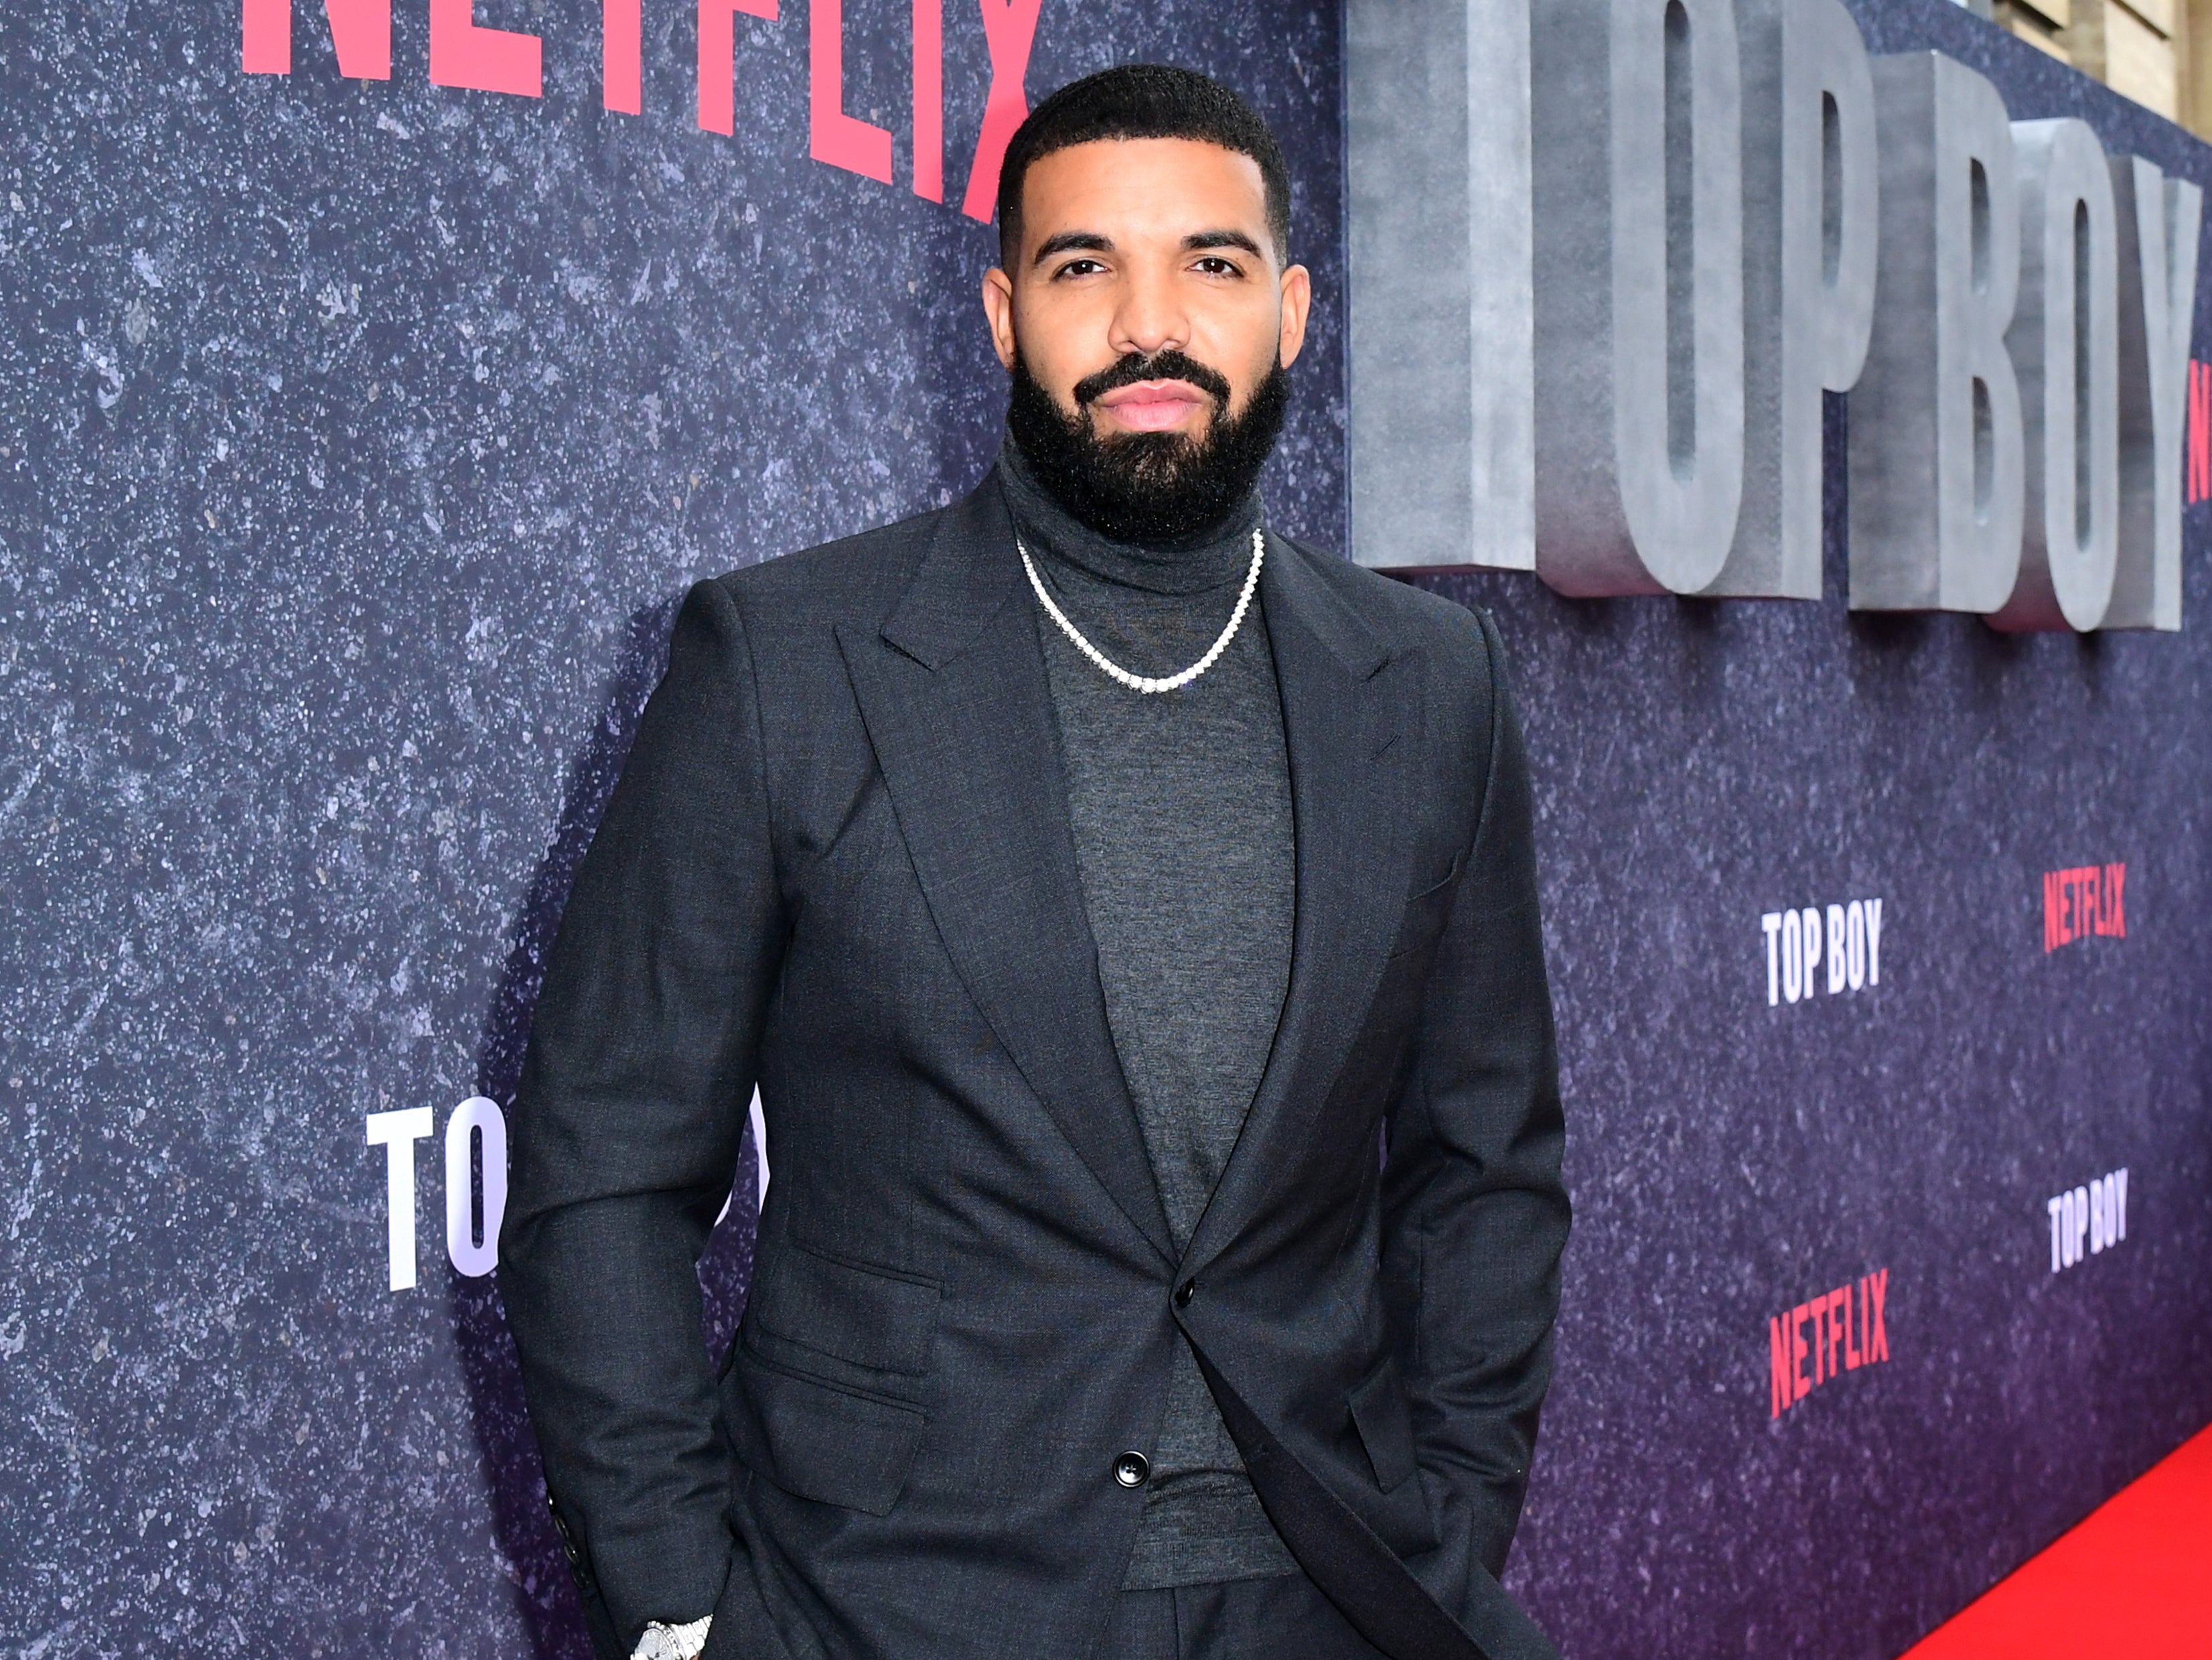 Drake at the UK premiere of Top Boy